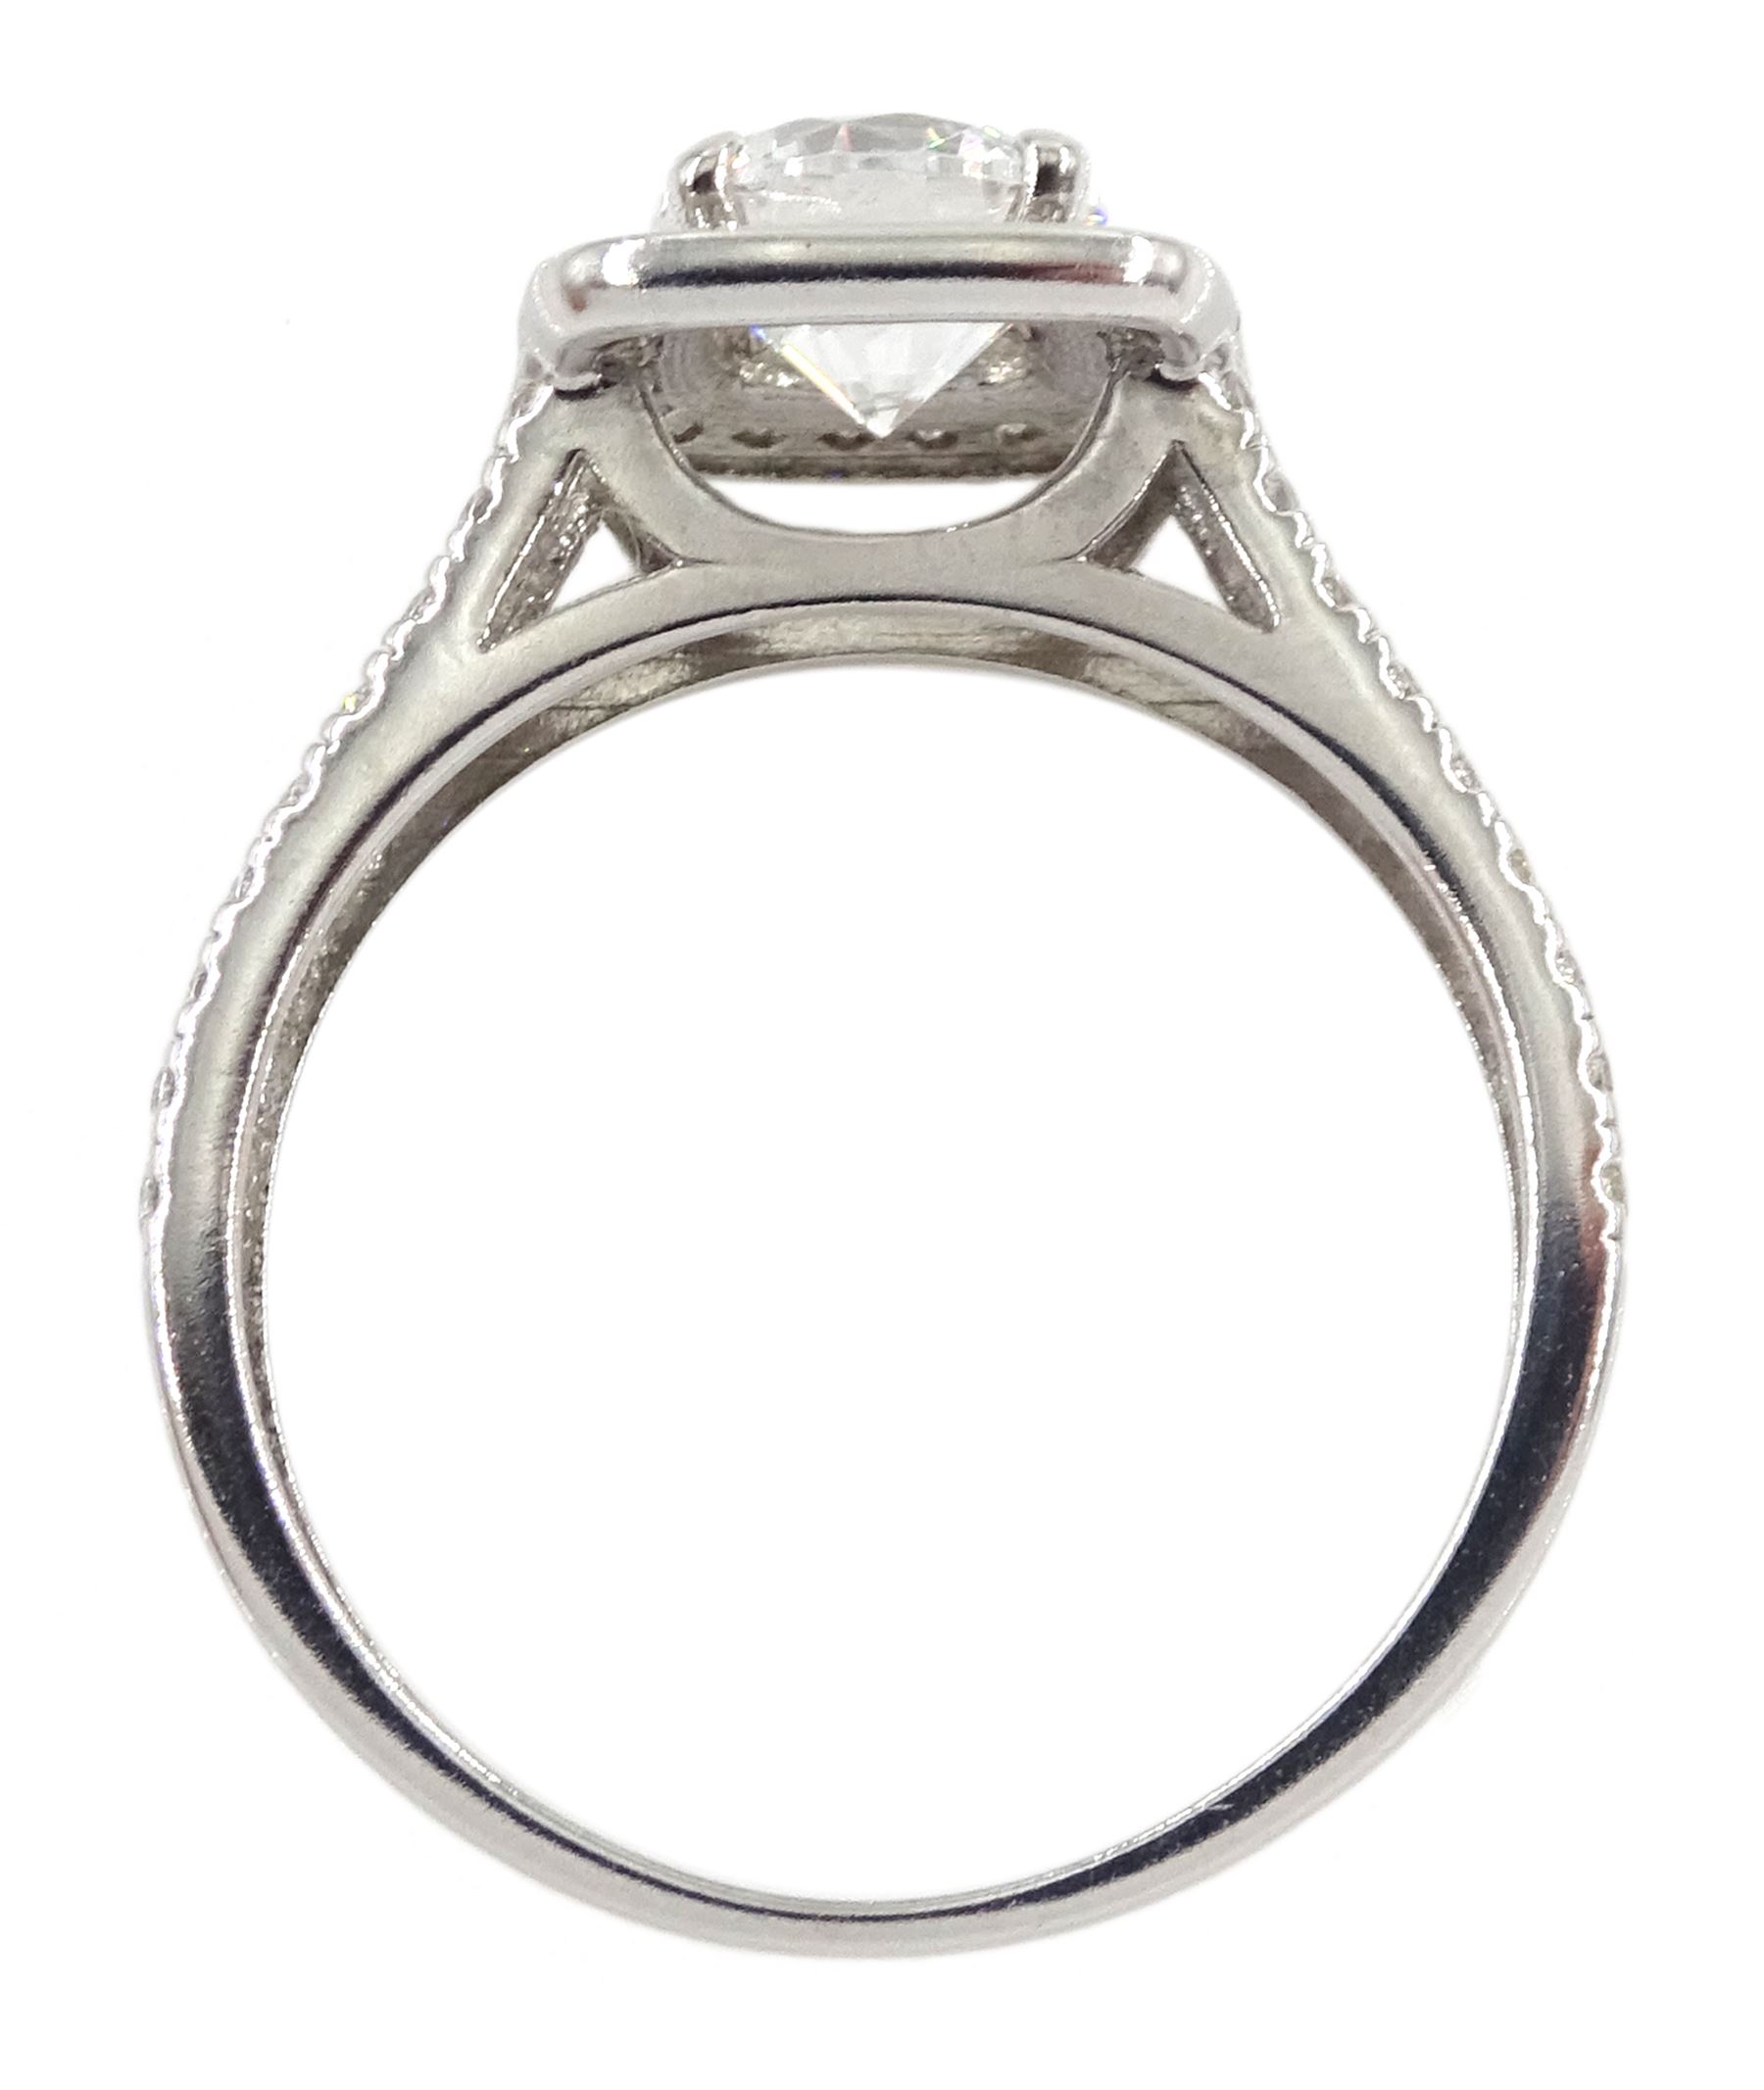 9ct white gold cubic zirconia dress ring - Image 4 of 4